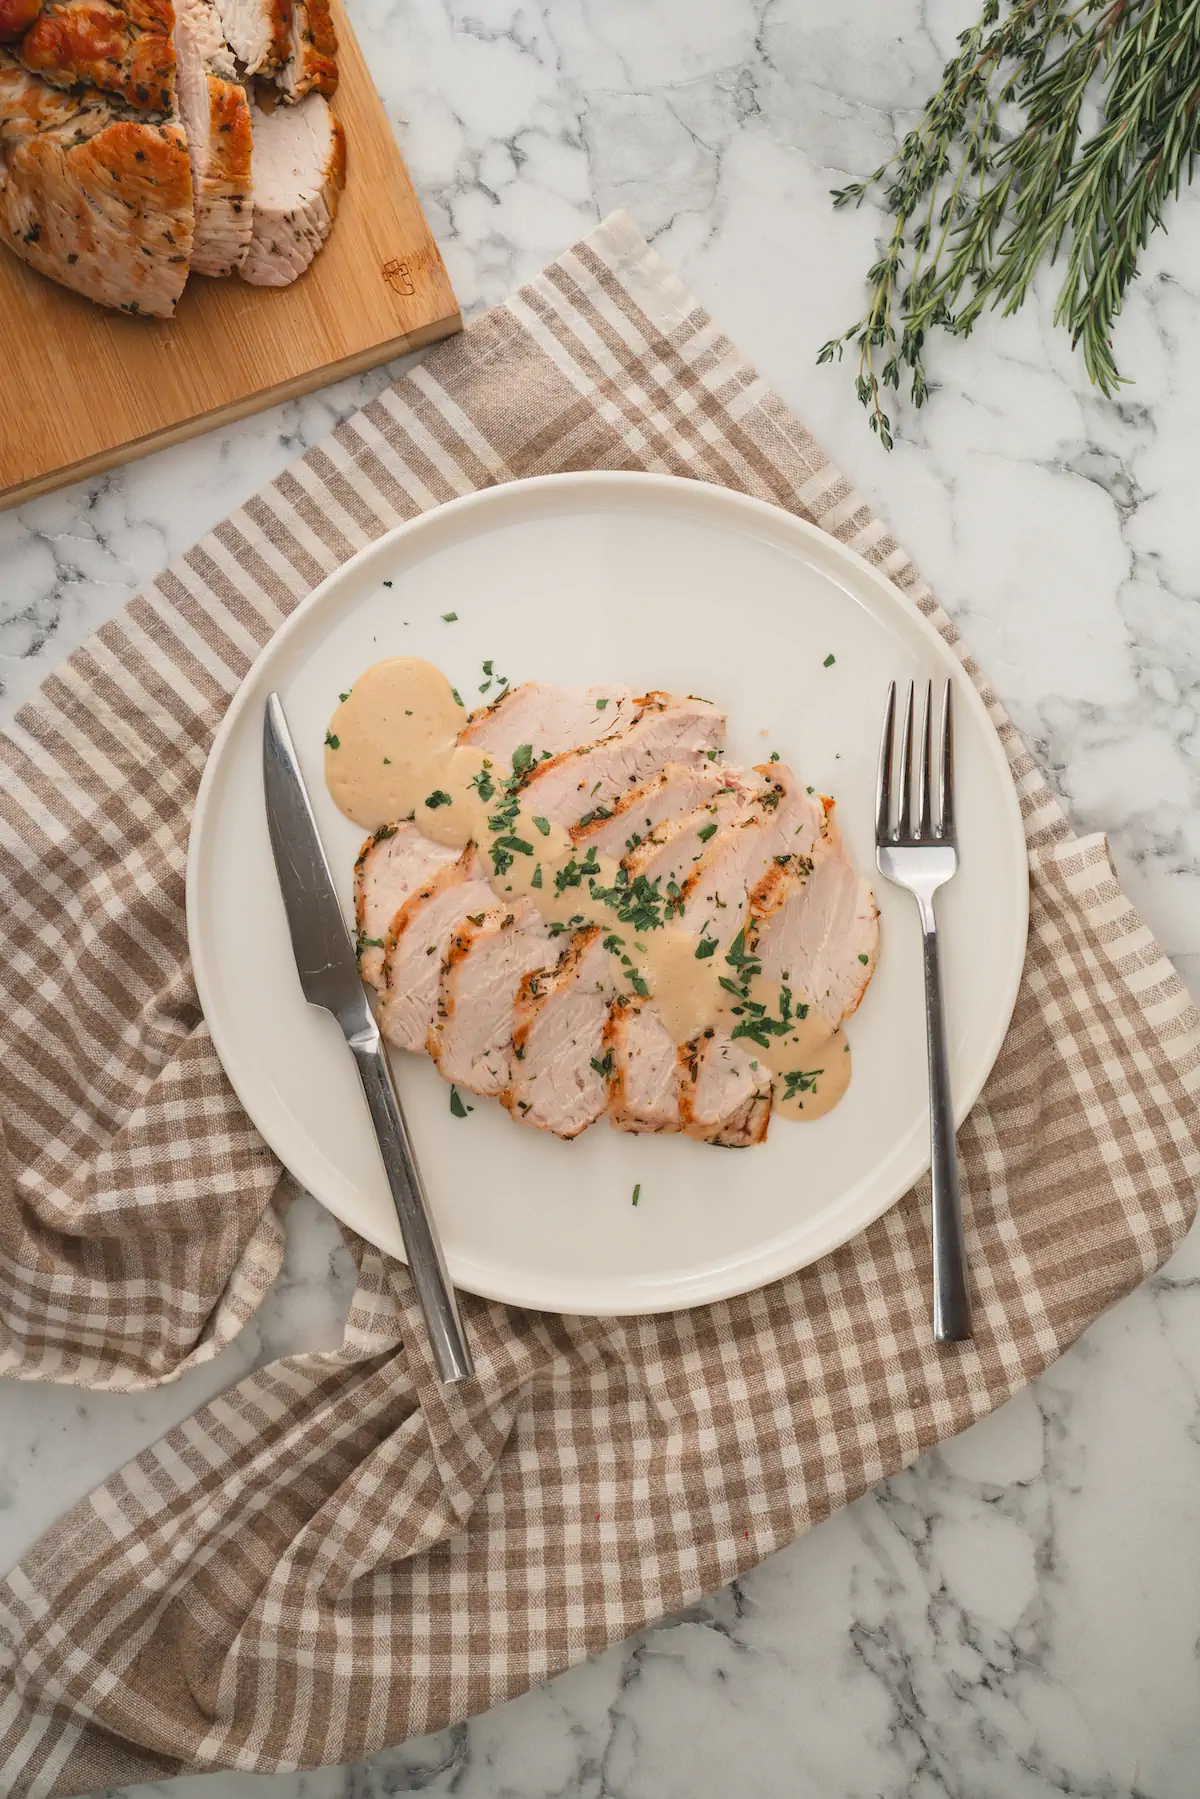 Slices of roasted turkey breast, served with keto gravy on a plate.